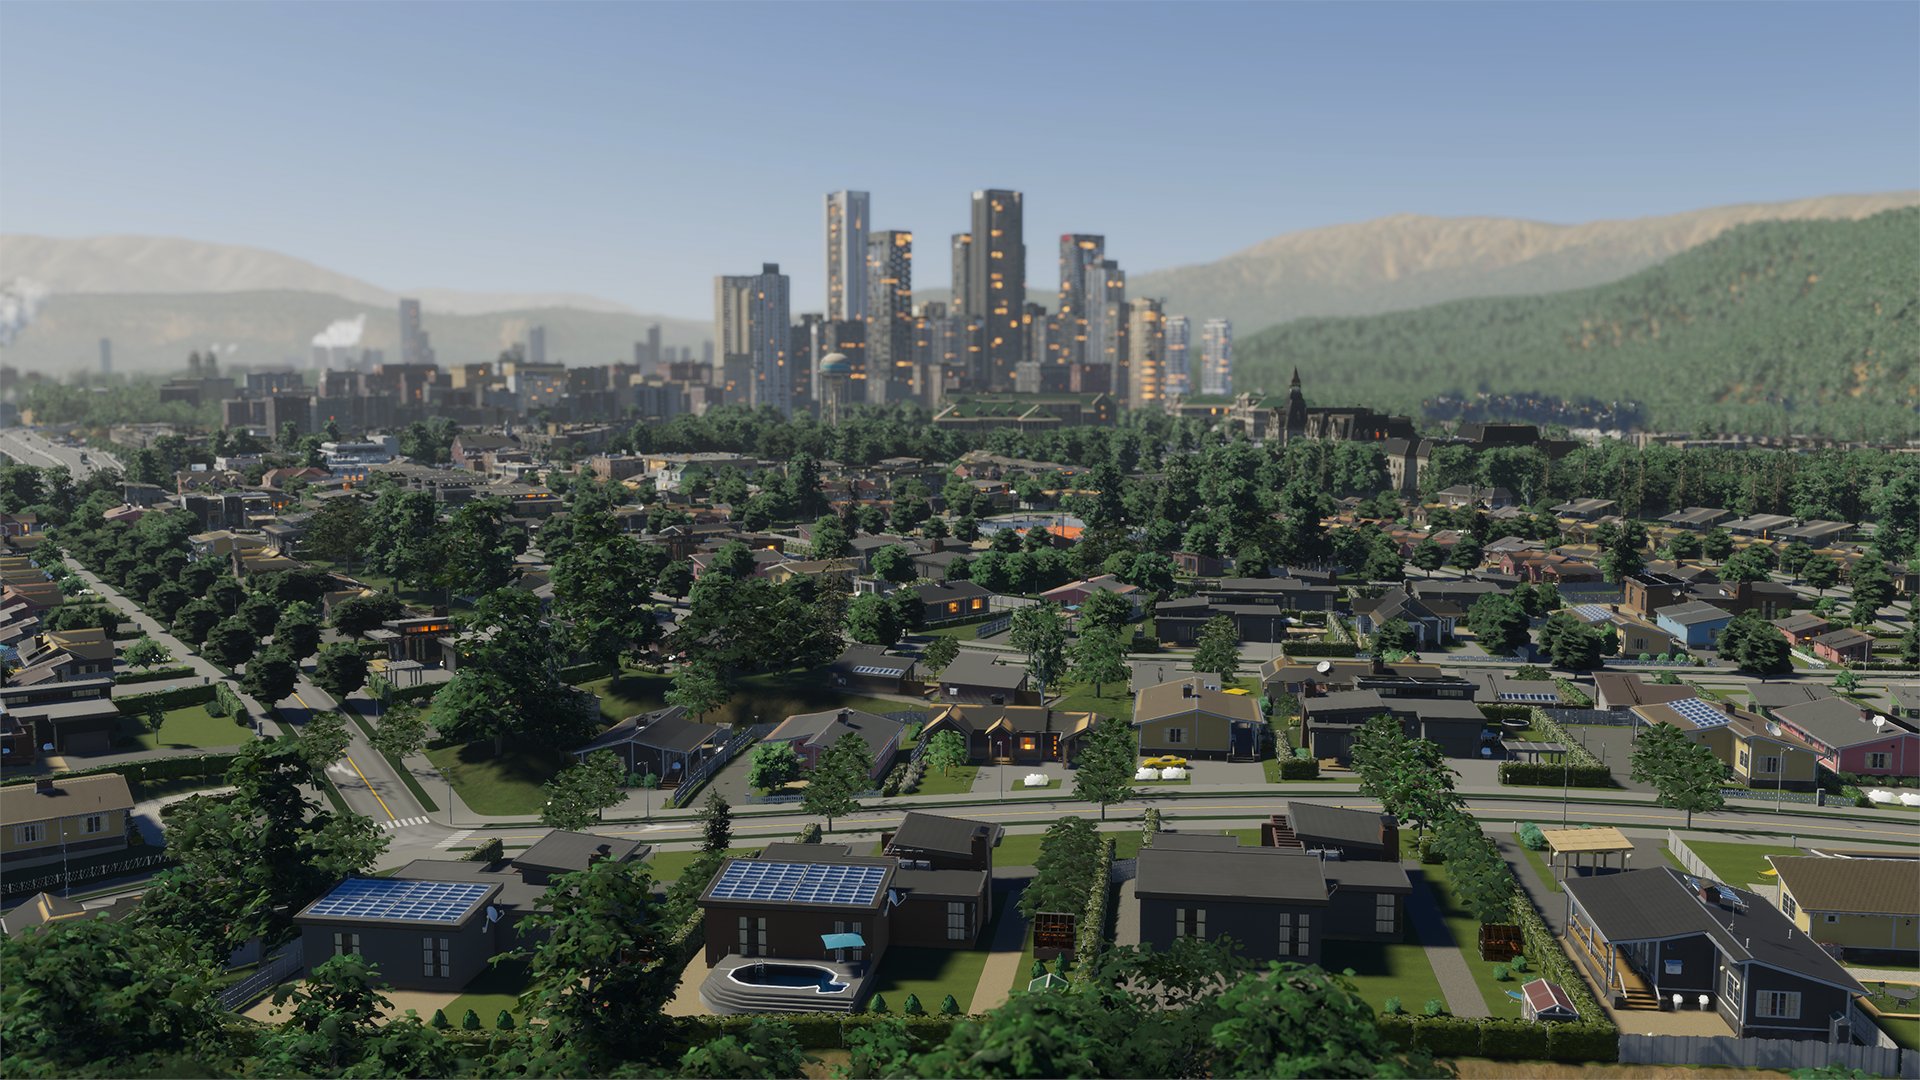 Updates on Modding and Performance for Cities: Skylines II